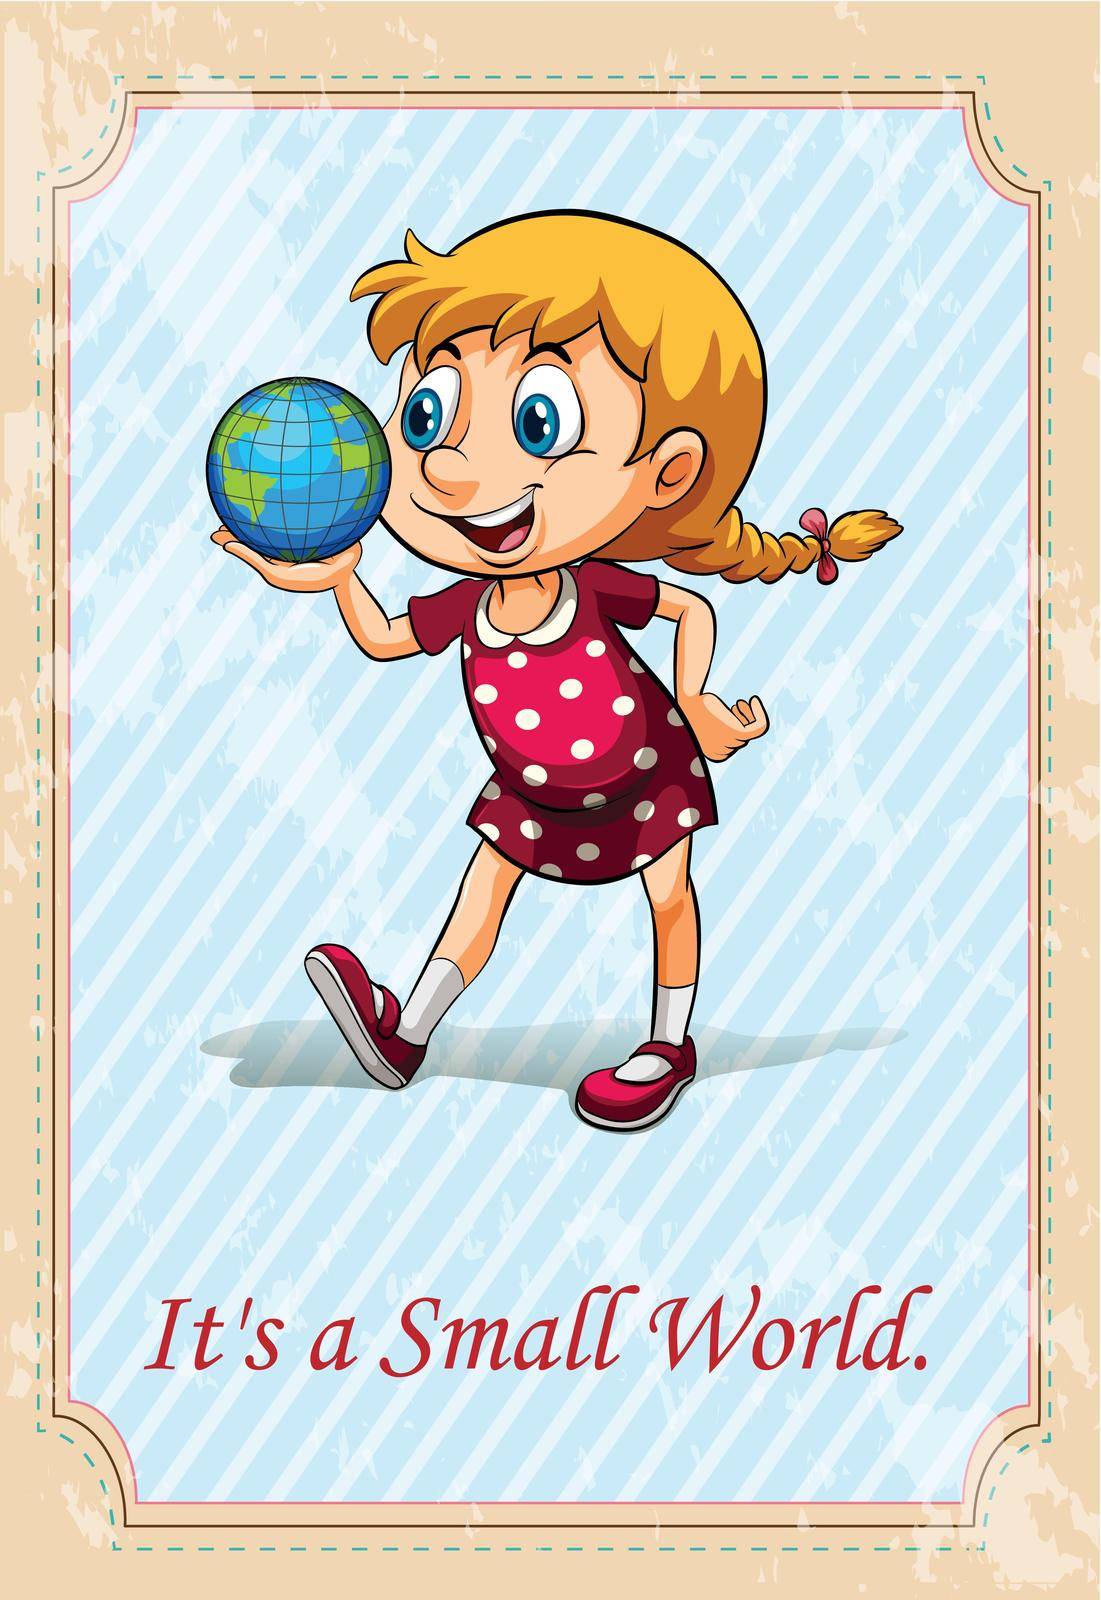 It is a small world illustration